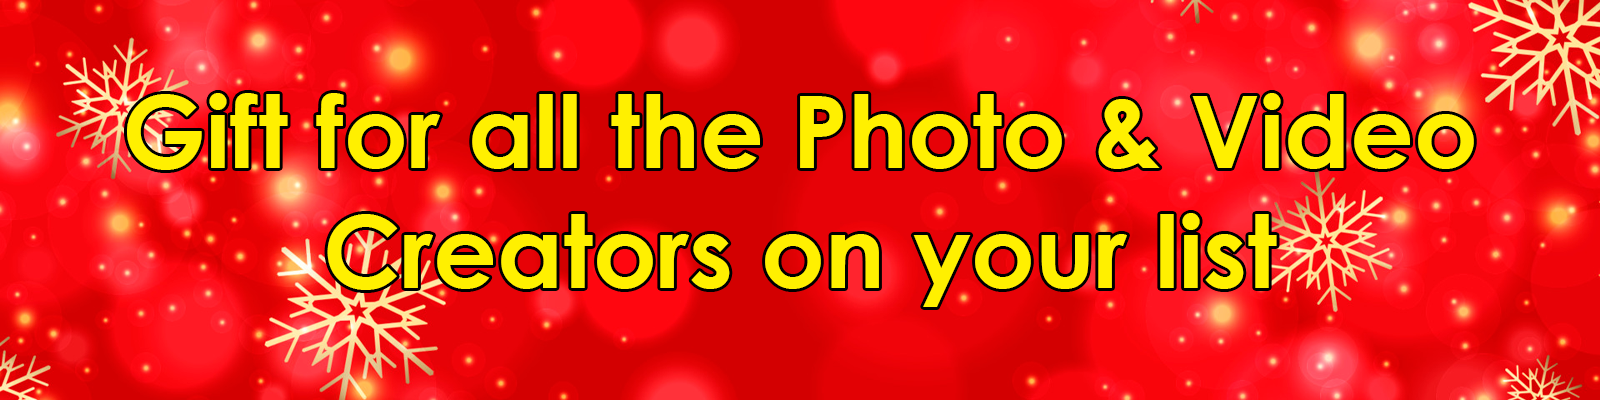 Gift for all the Photo & Video Creators on your list